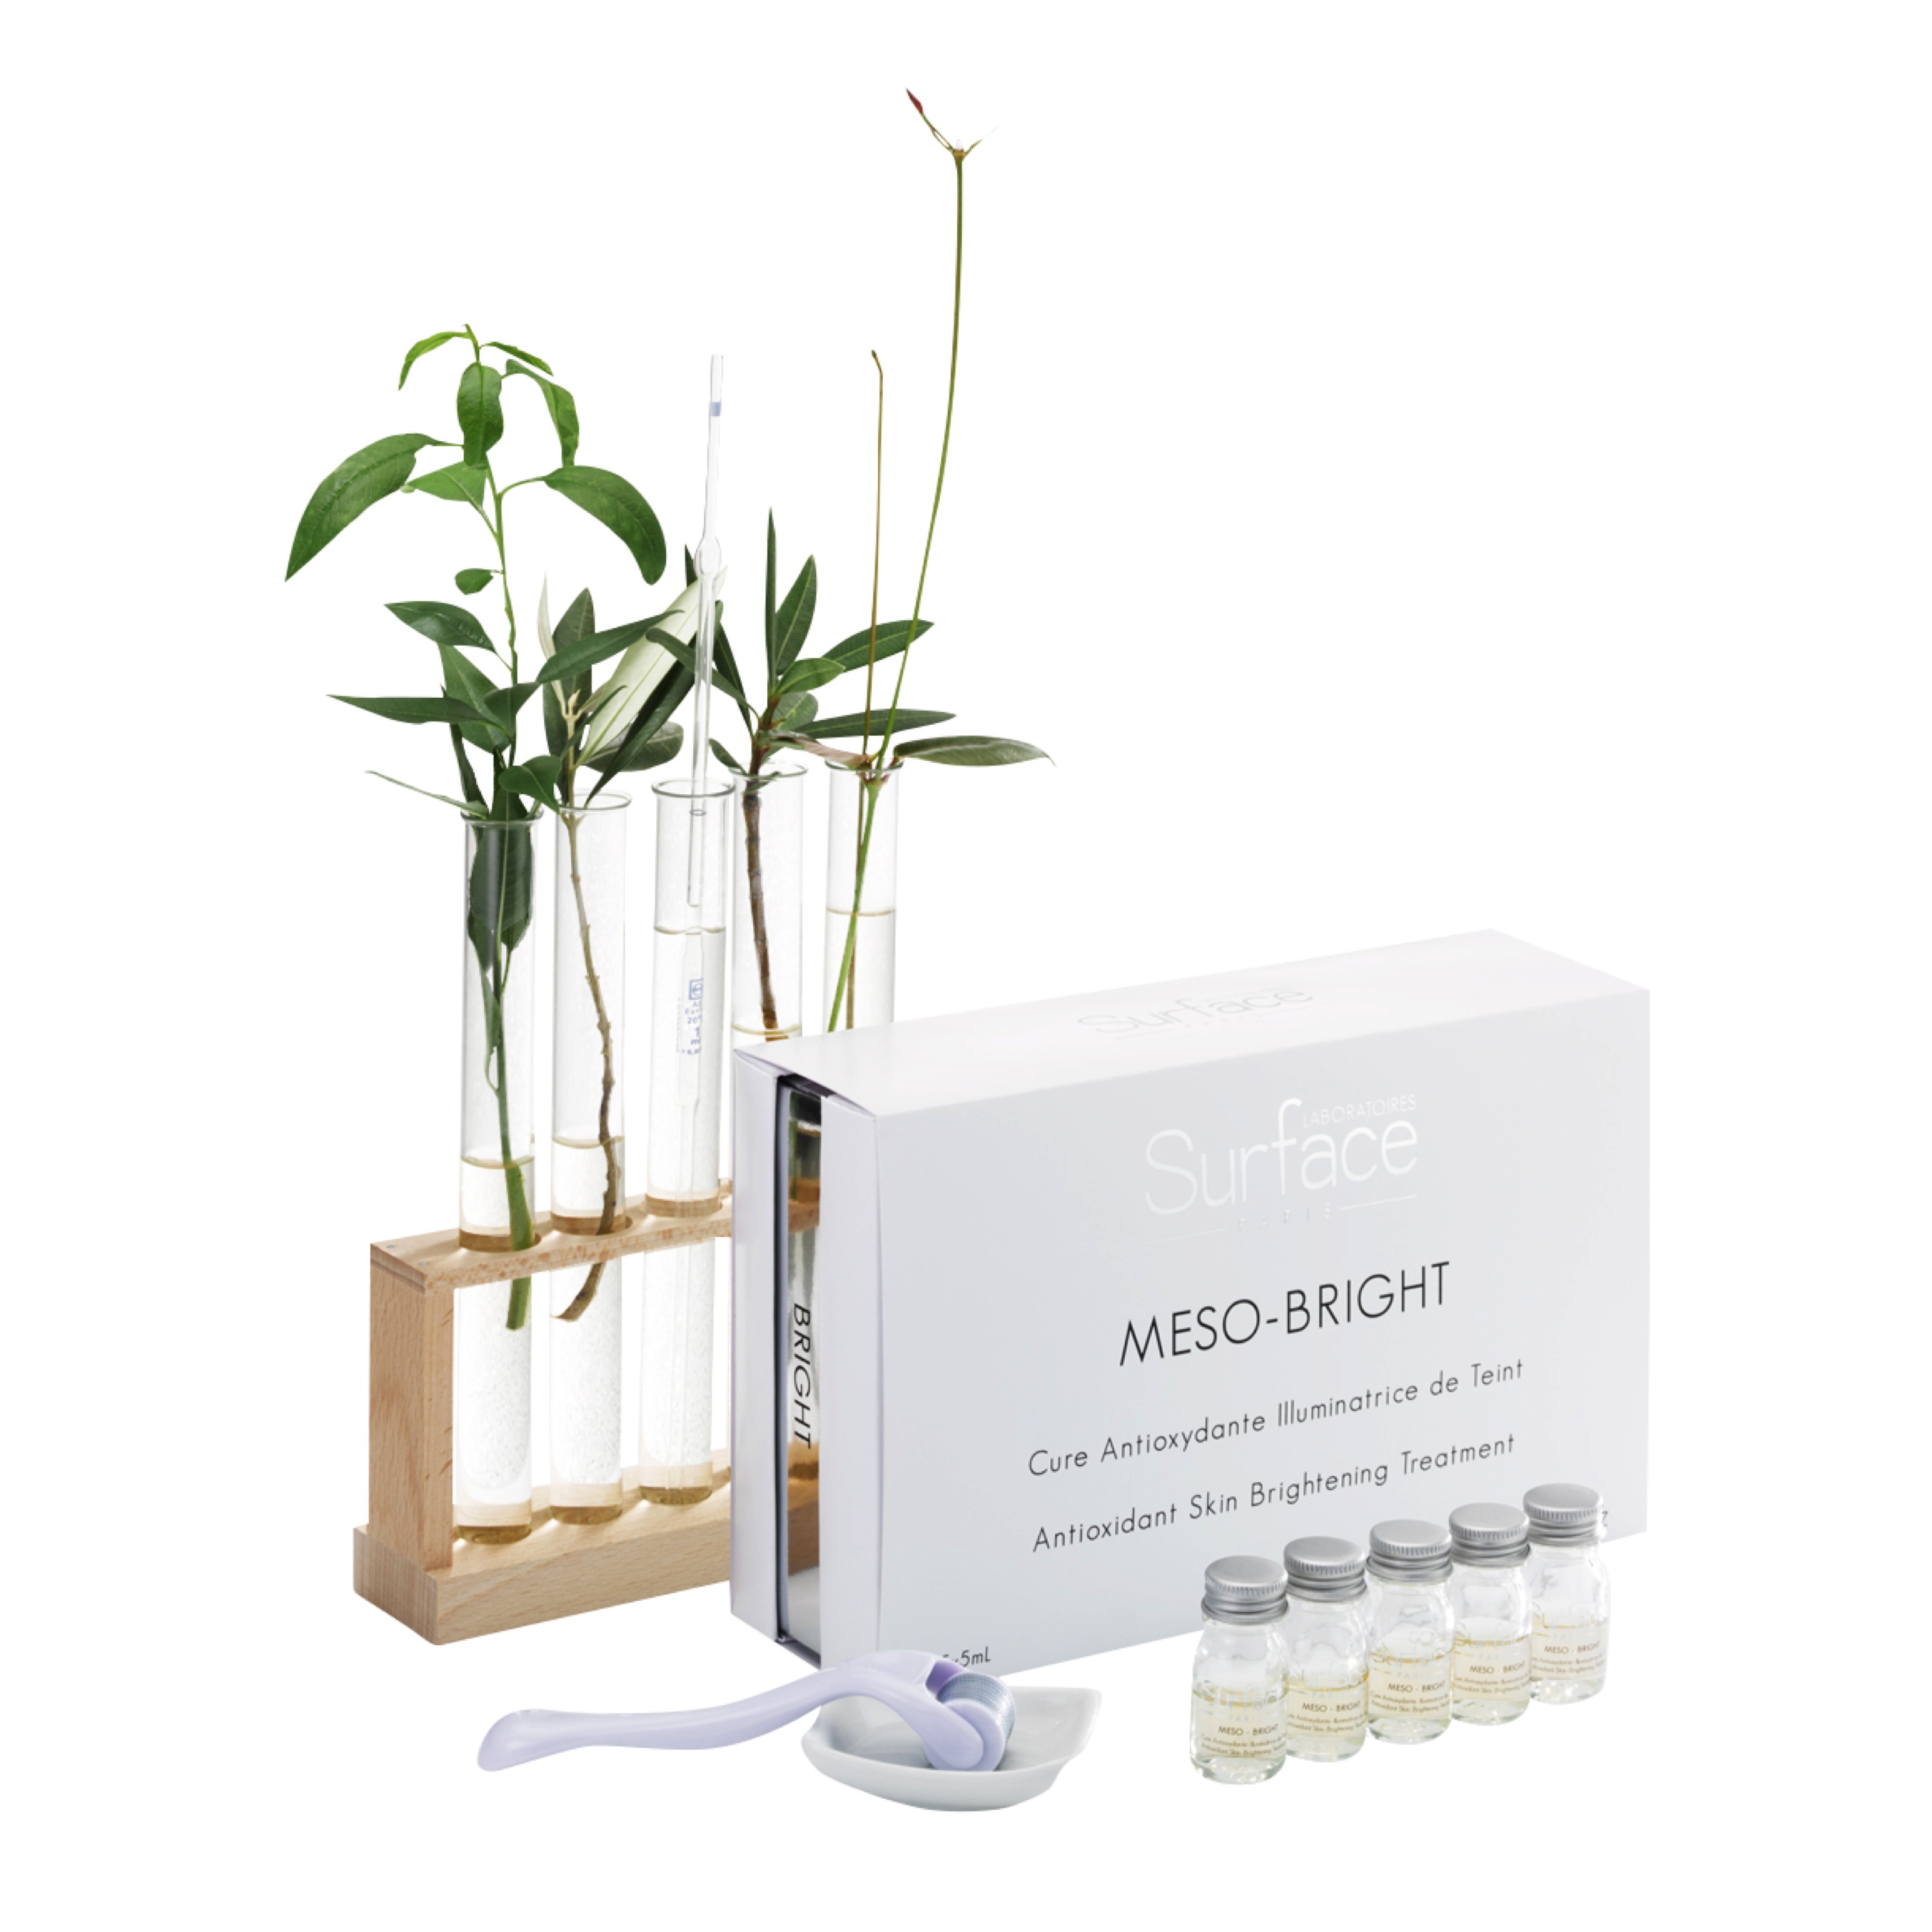 Surface Paris Meso Bright At-Home Mesotherapy Treatment